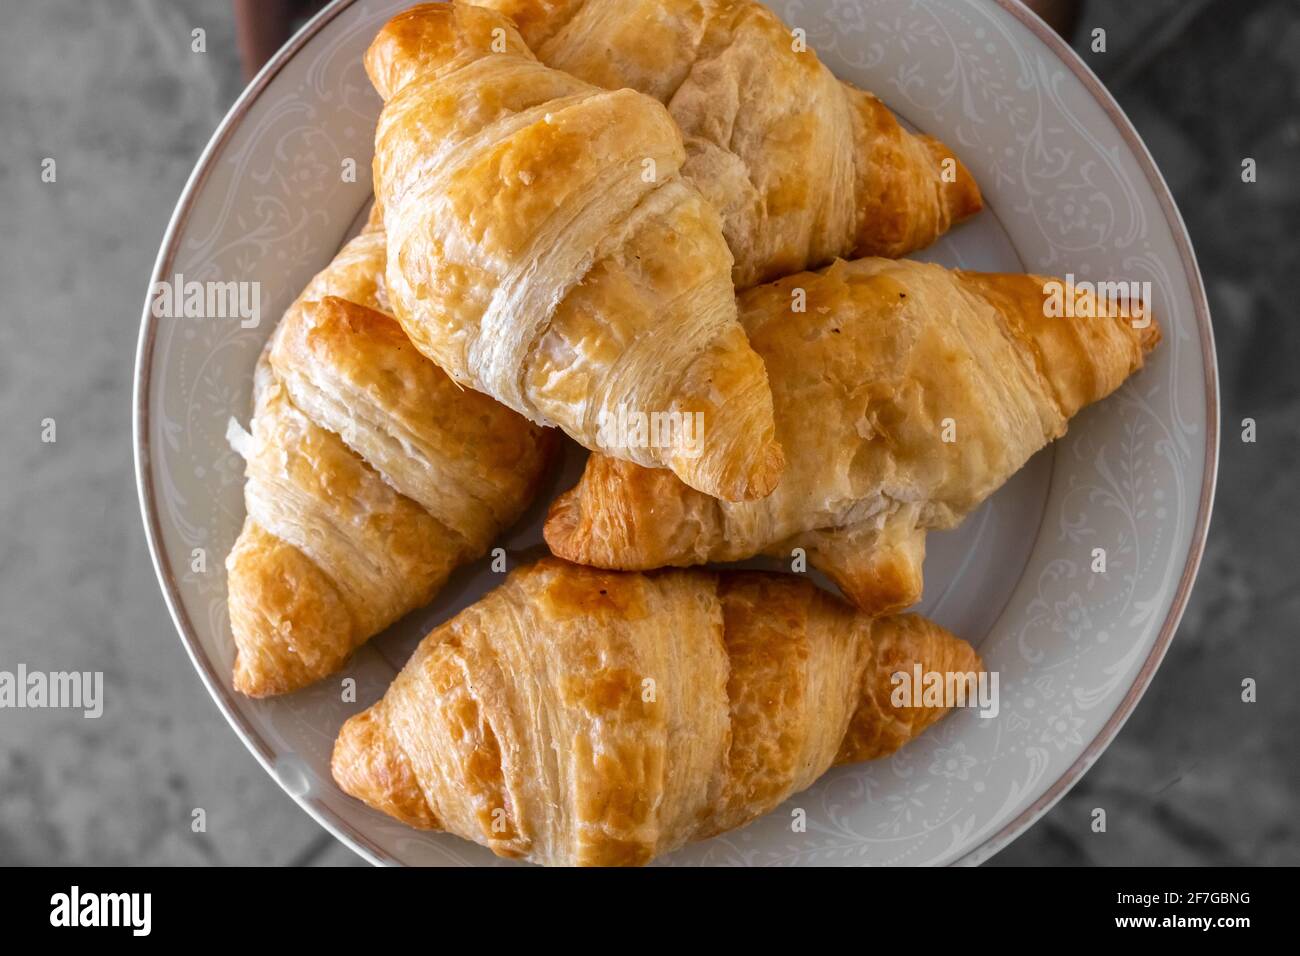 A plate of delicious golden, warm miniature croissants, photographed up close, in Toronto, Ontario, Canada, February 2021. Stock Photo